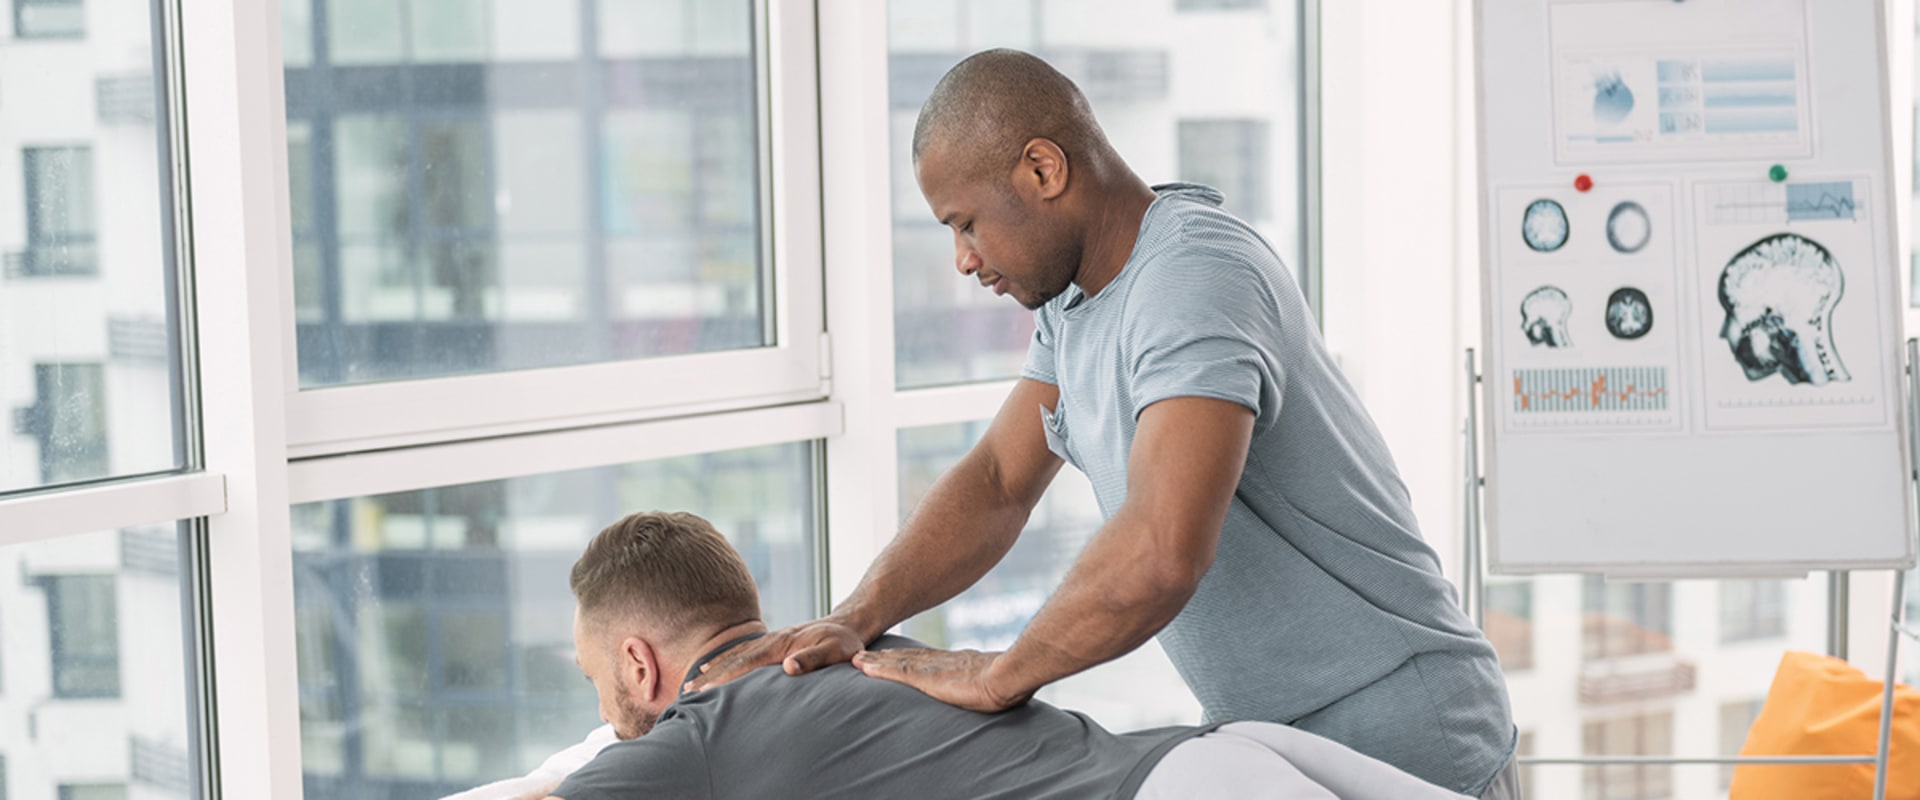 Is massage therapy a good career?